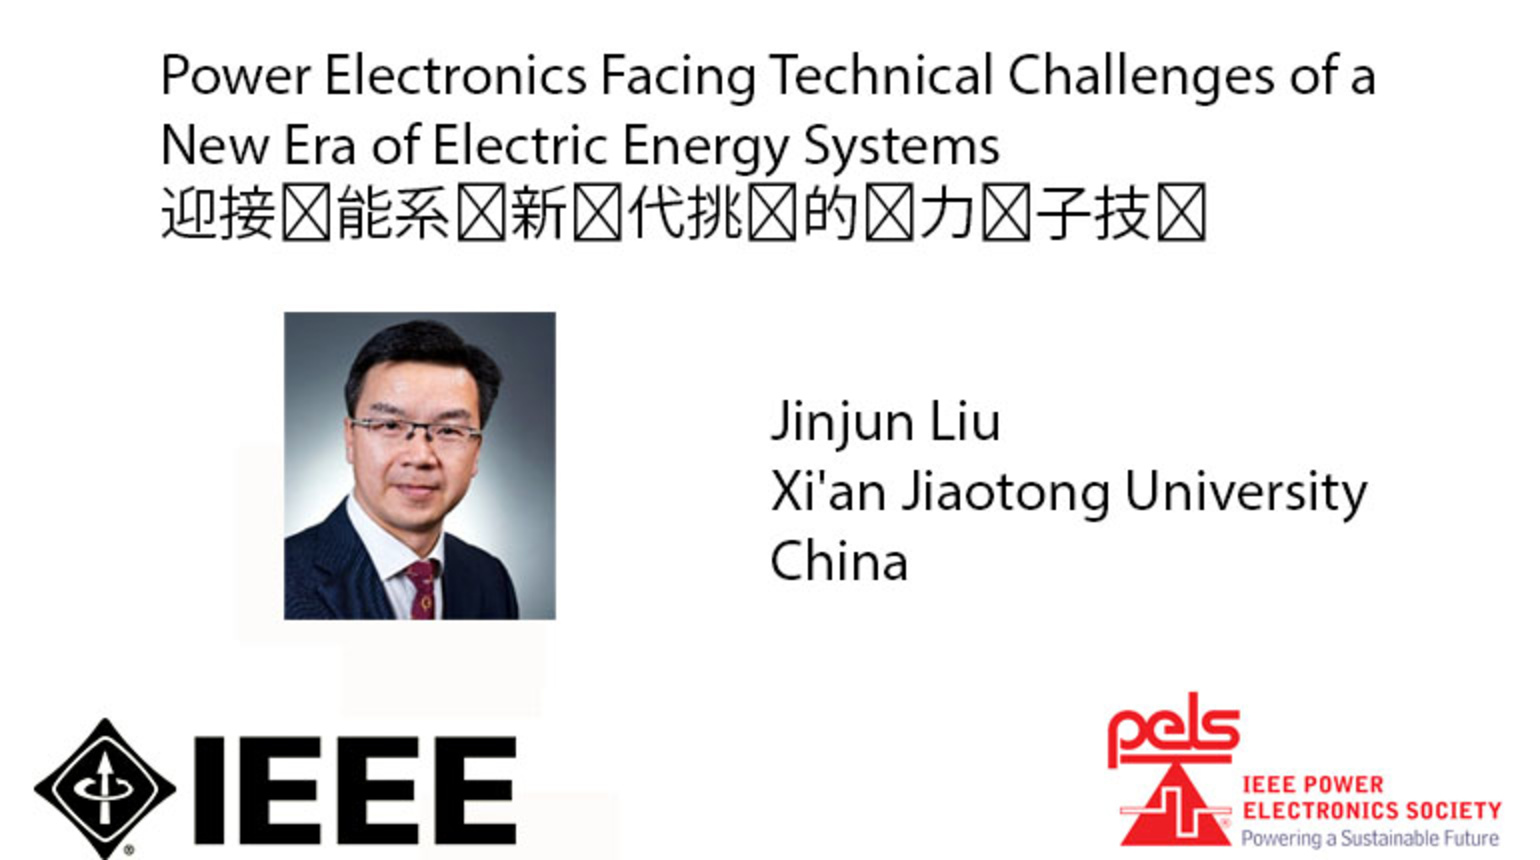 Power Electronics Facing Technical Challenges of a New Era of Electric Energy Systems-Video